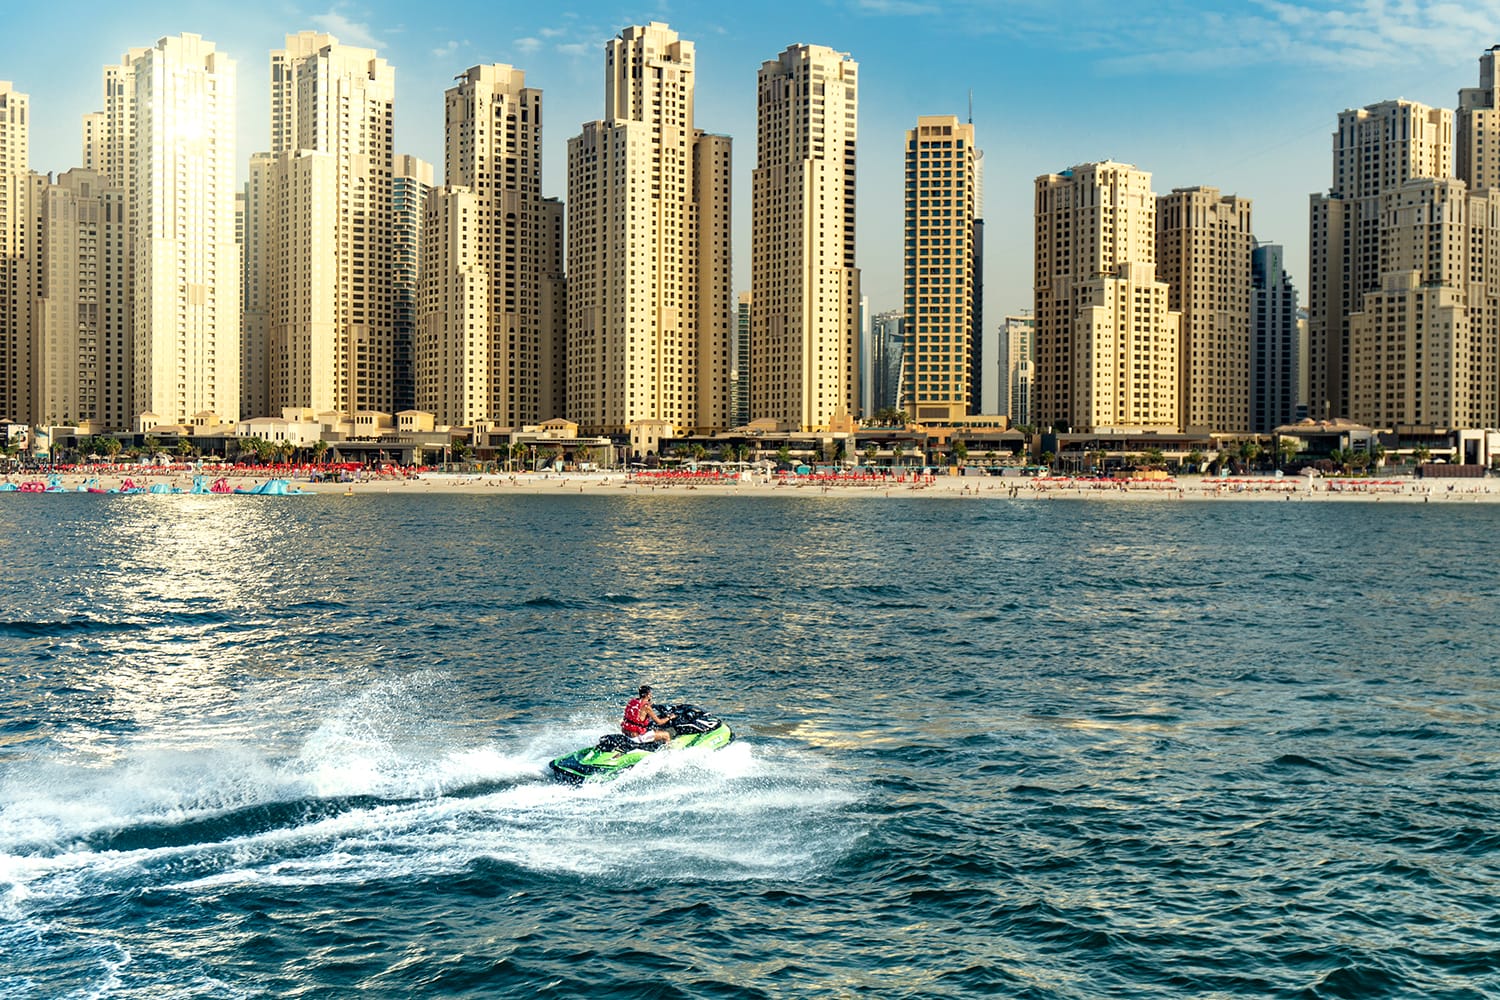 A man doing a water sport in the water with the Dubai skyline in the background.